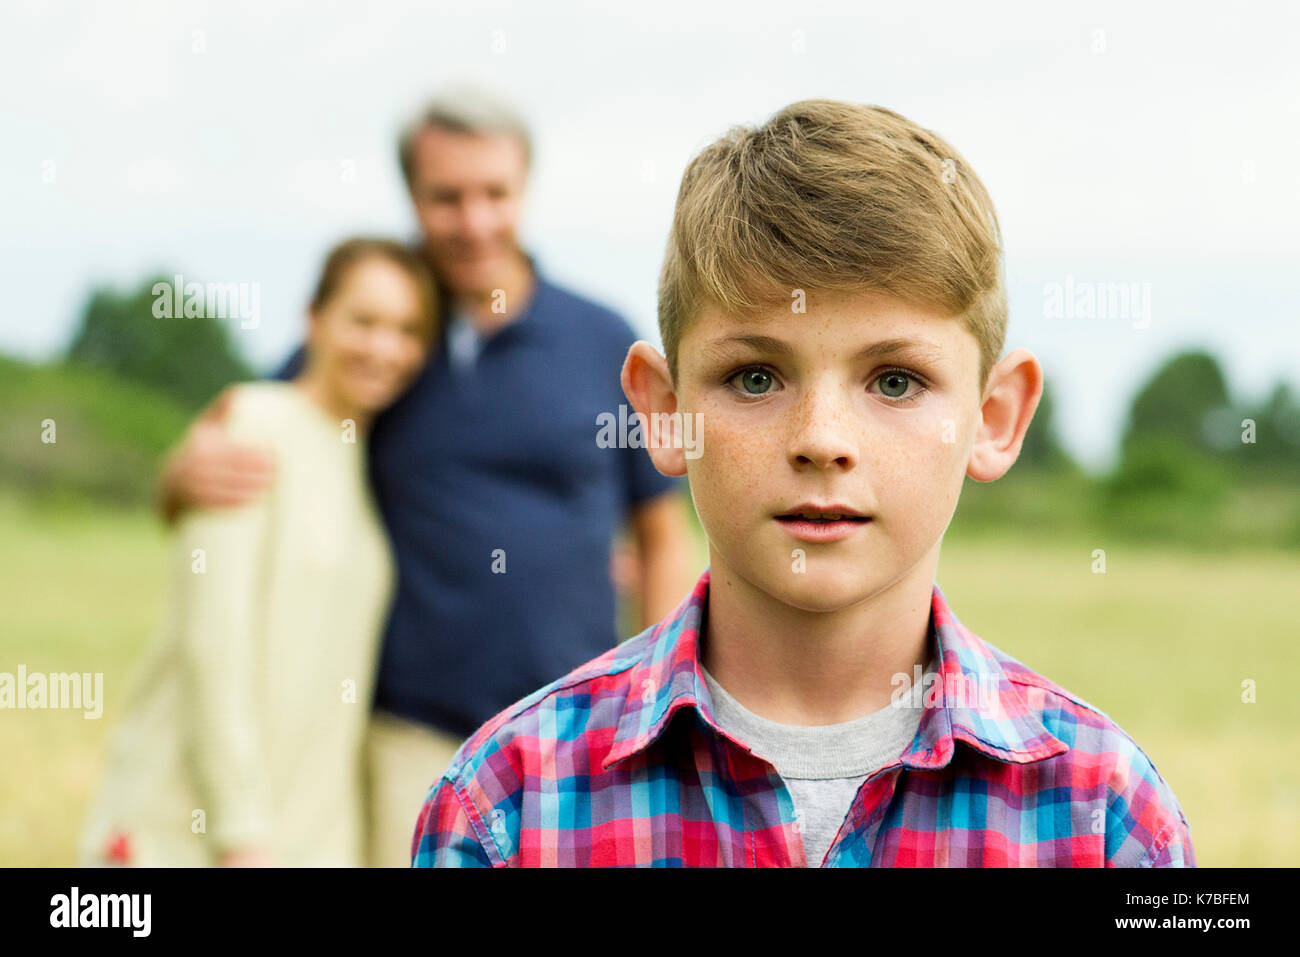 Boy with parents in background, portrait Stock Photo